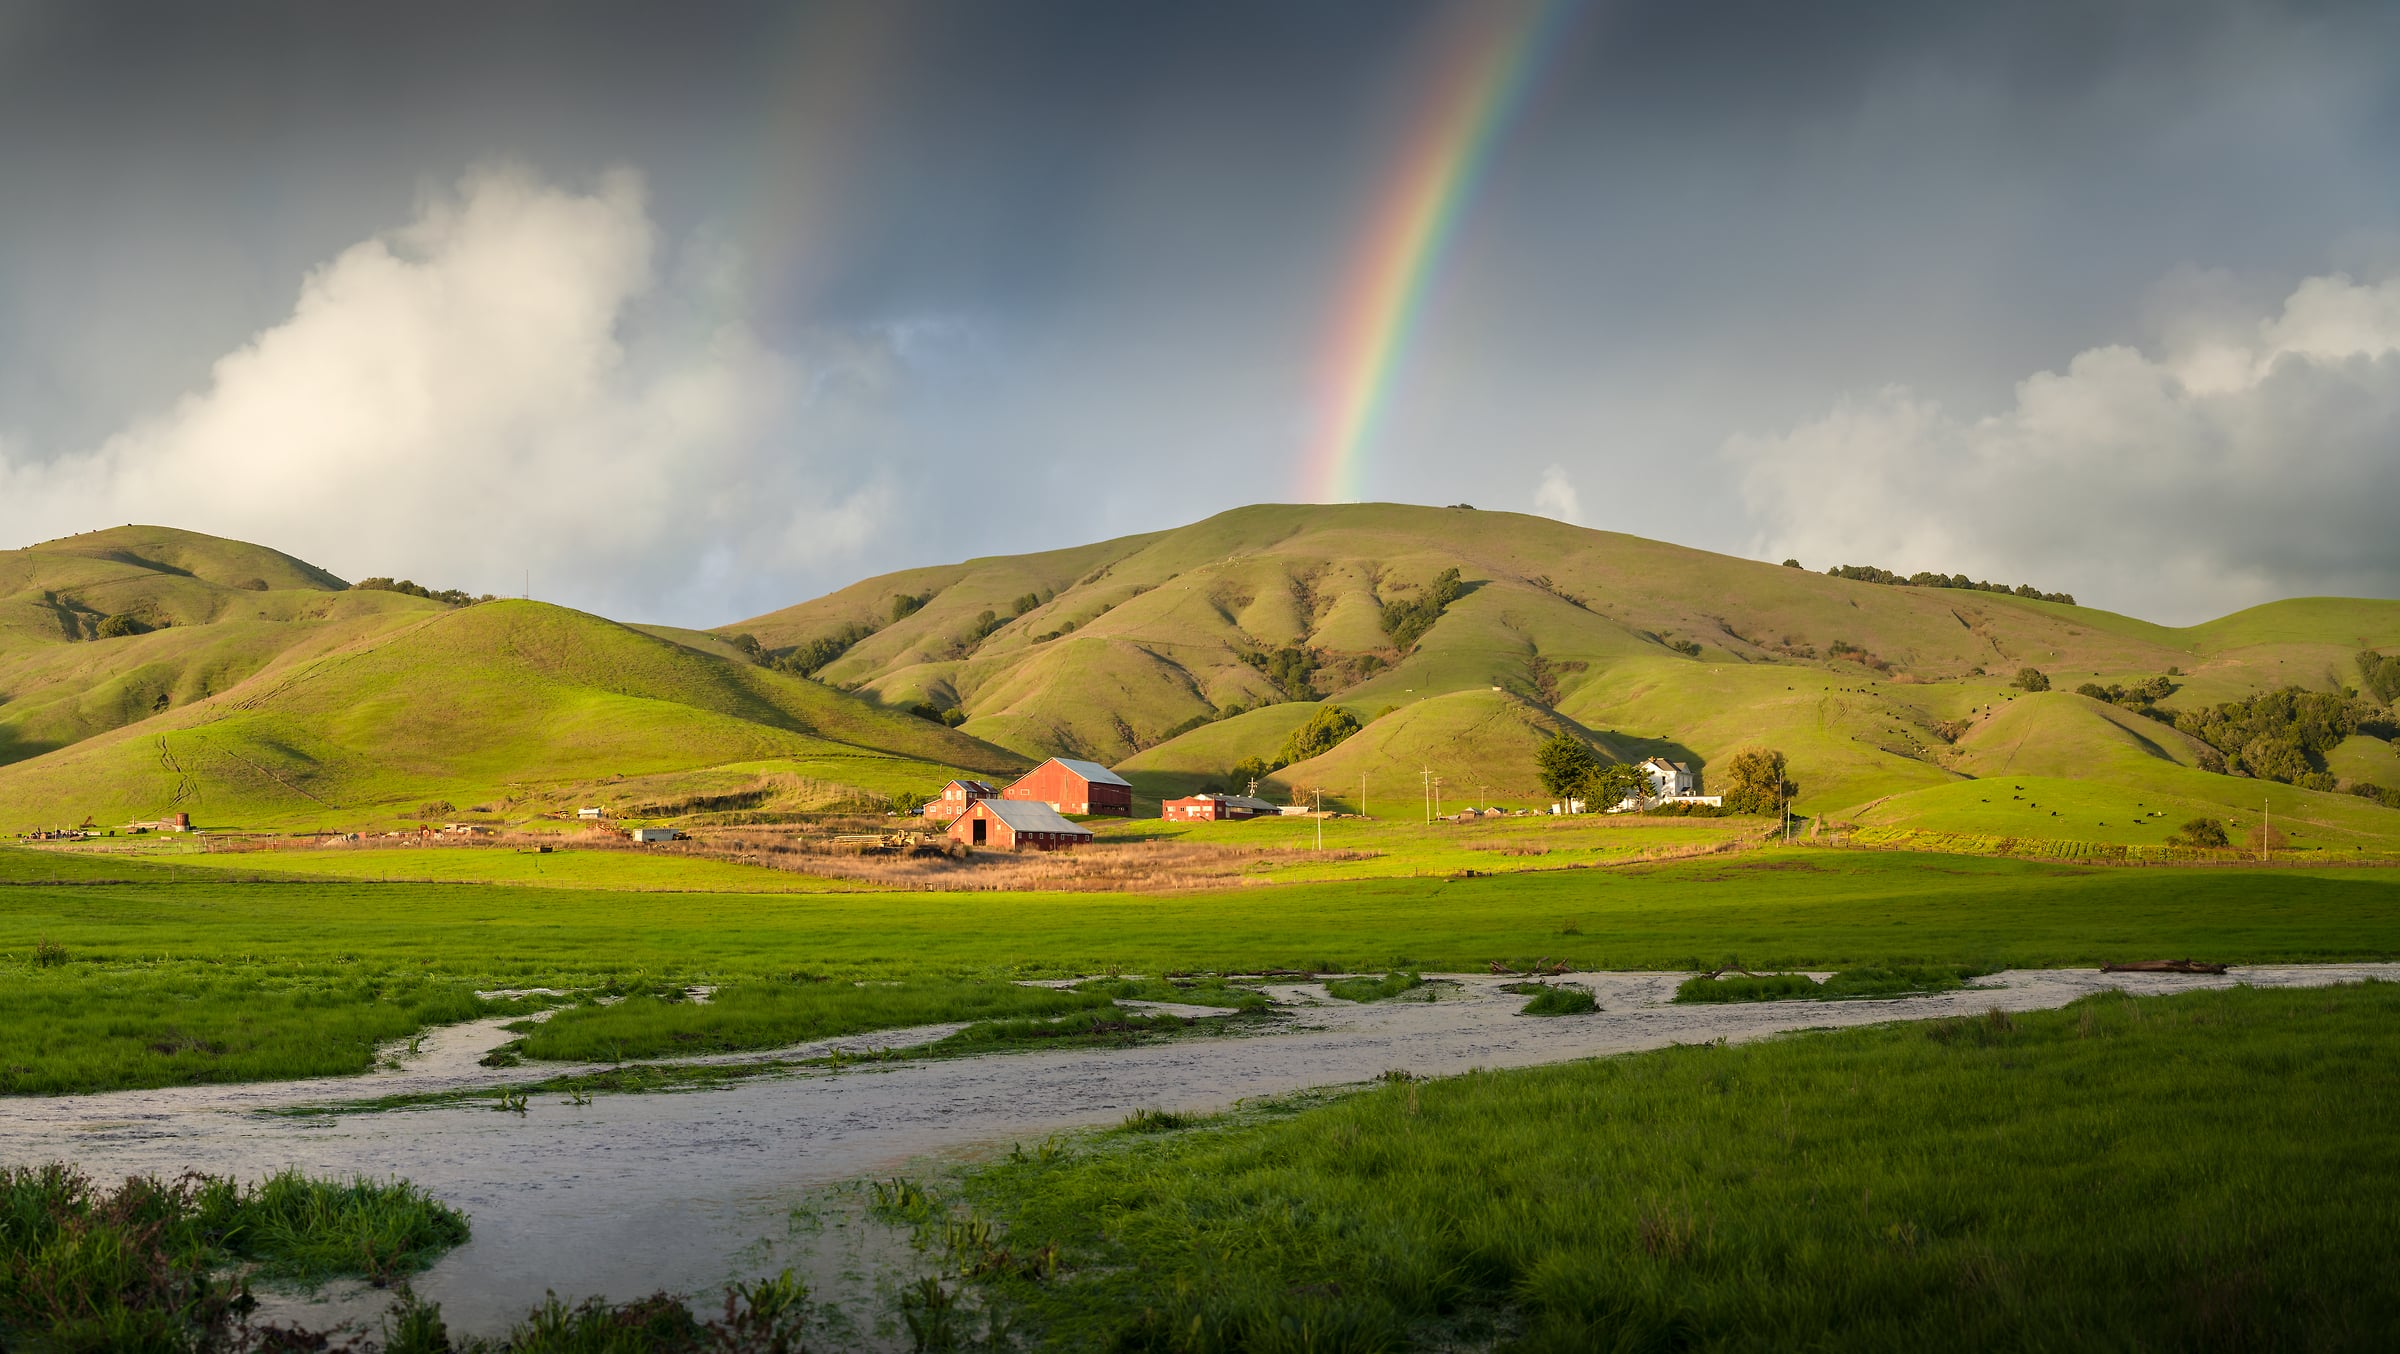 229 megapixels! A very high resolution, large-format VAST photo print of an idyllic farm landscape with a rainbow; photograph created by Jeff Lewis in Marin County, California.